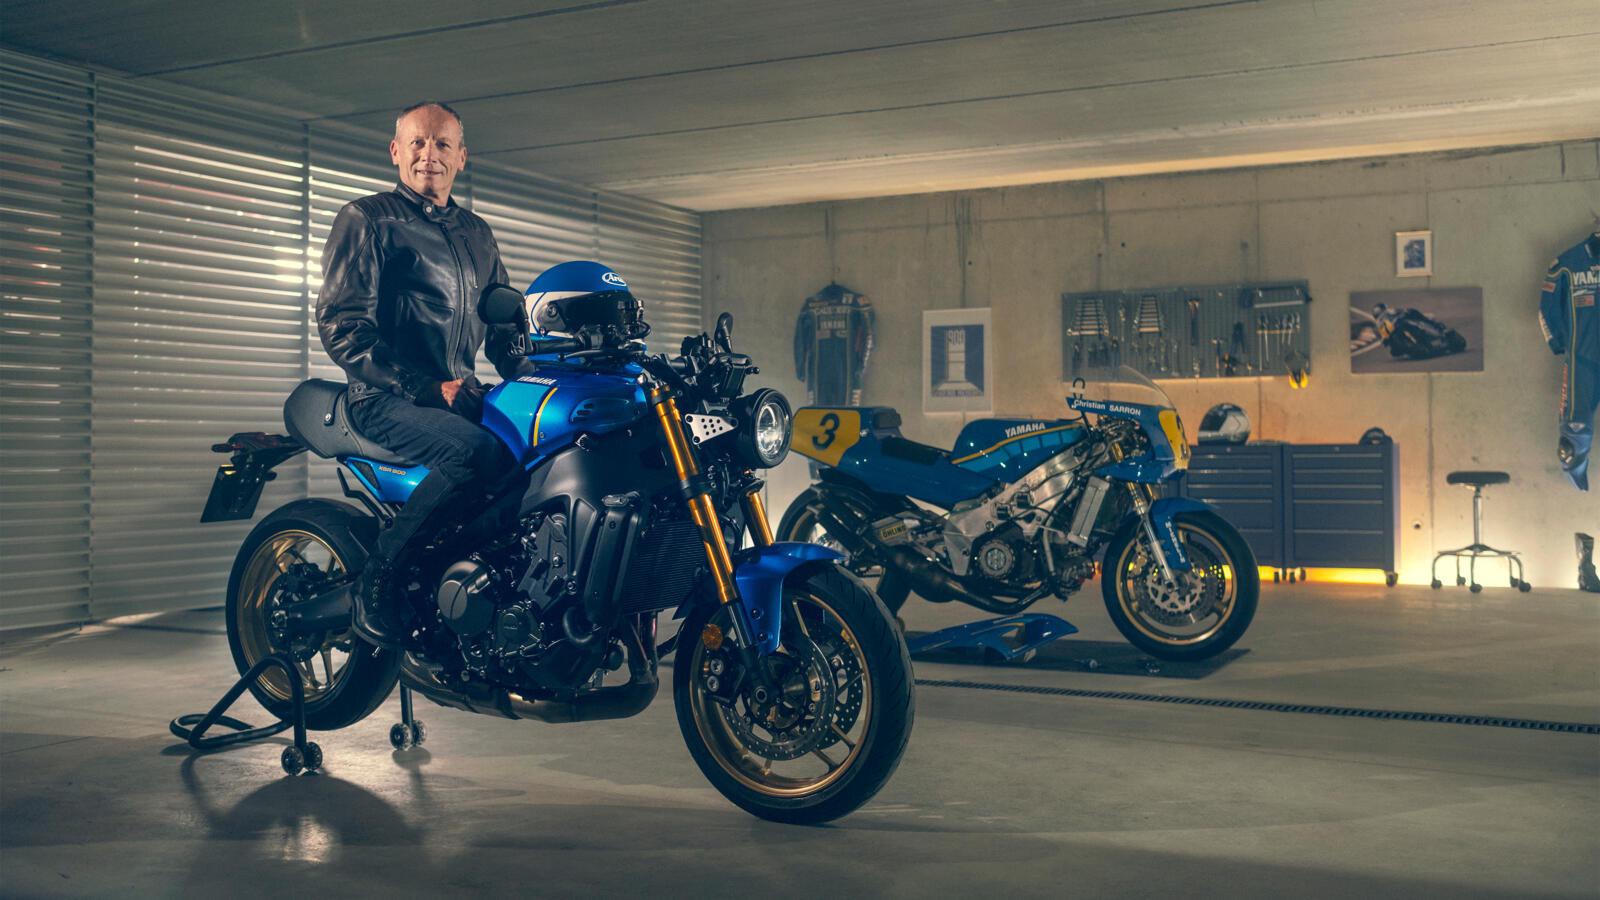 GP racer Christian Sarron and the new 2022 Yamaha XSR900 motorcycle in the workshop